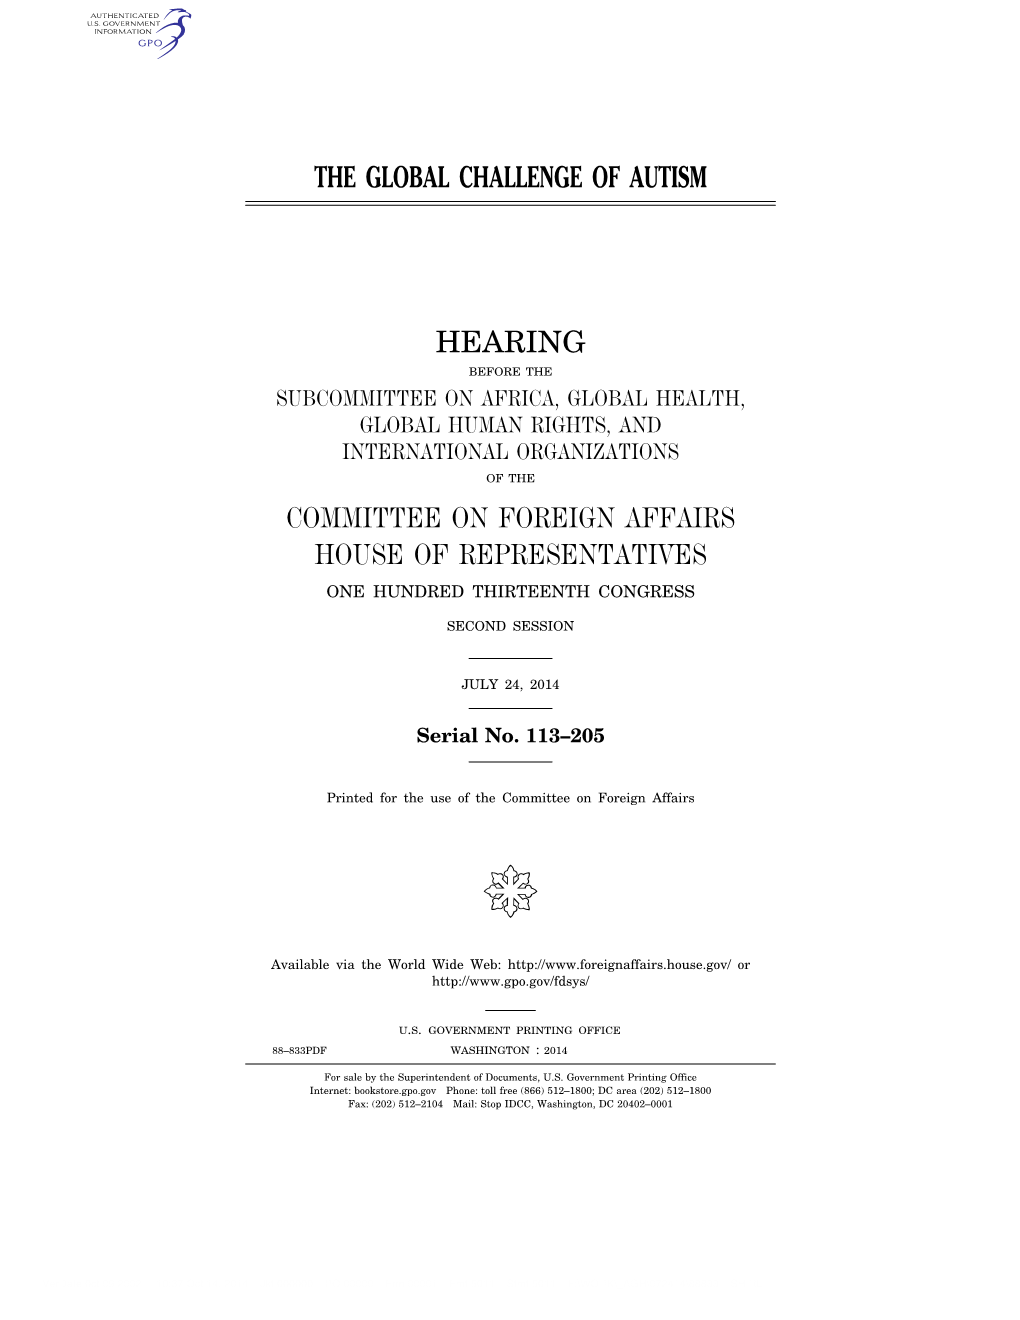 The Global Challenge of Autism Hearing Committee on Foreign Affairs House of Representatives